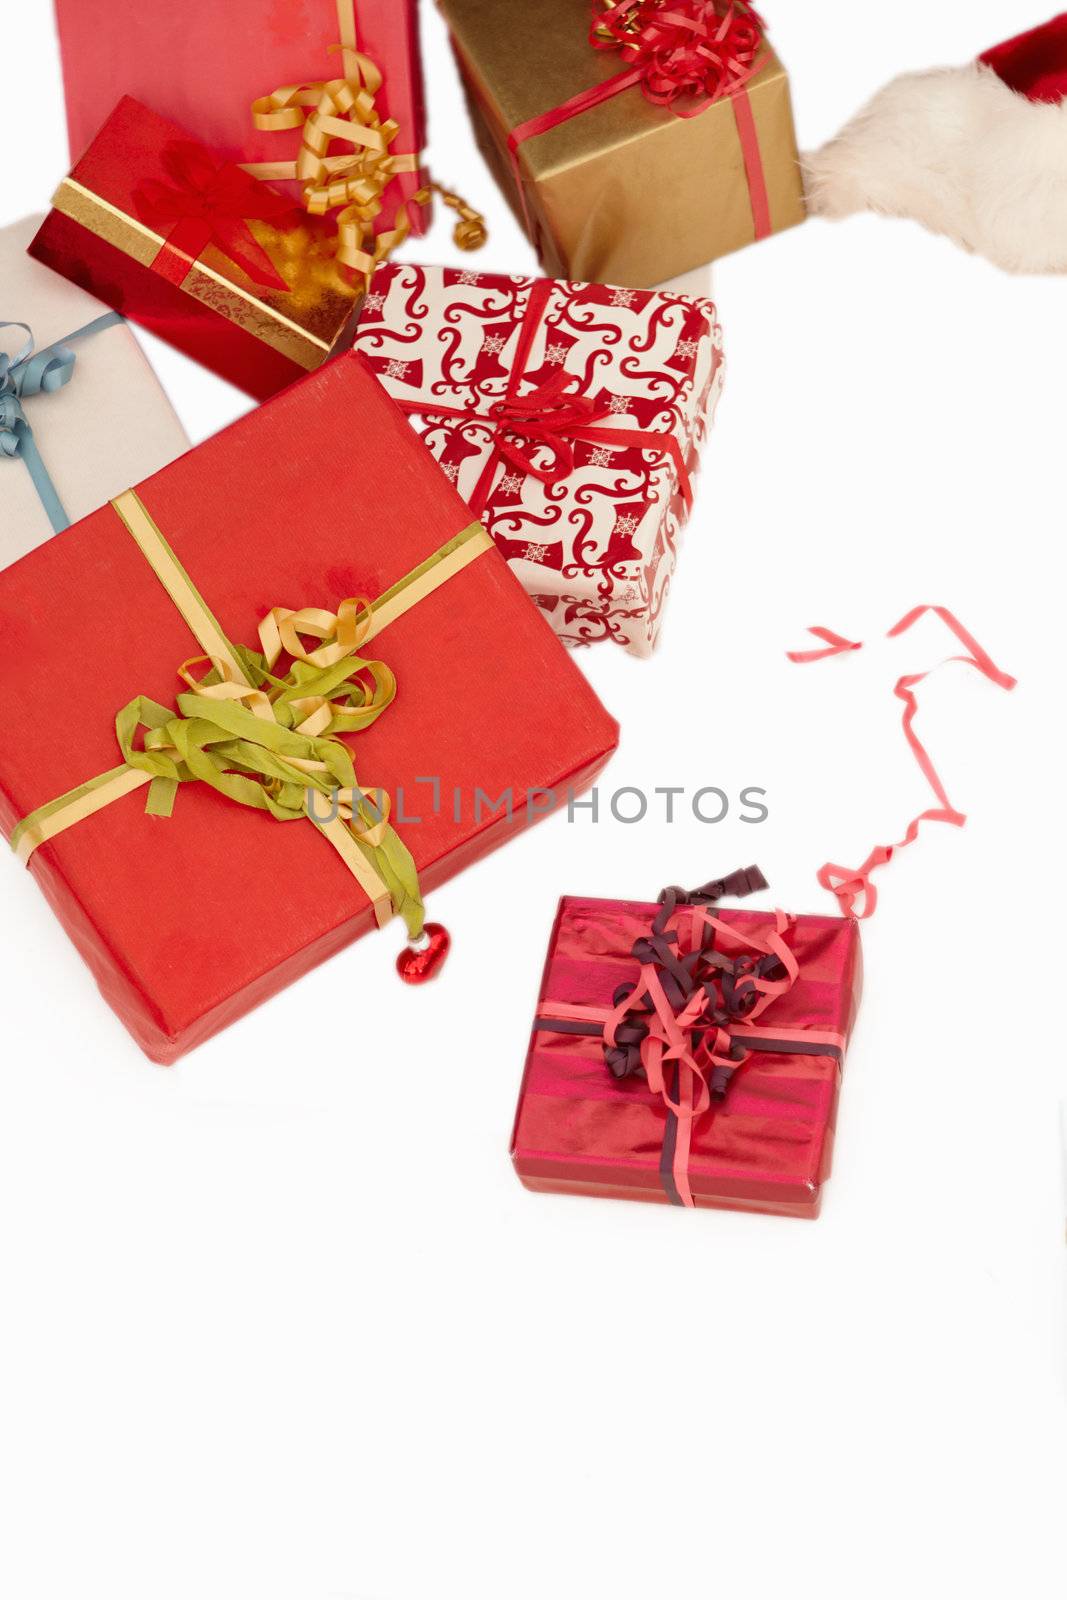 Christmas presents - On white background by FreedomImage